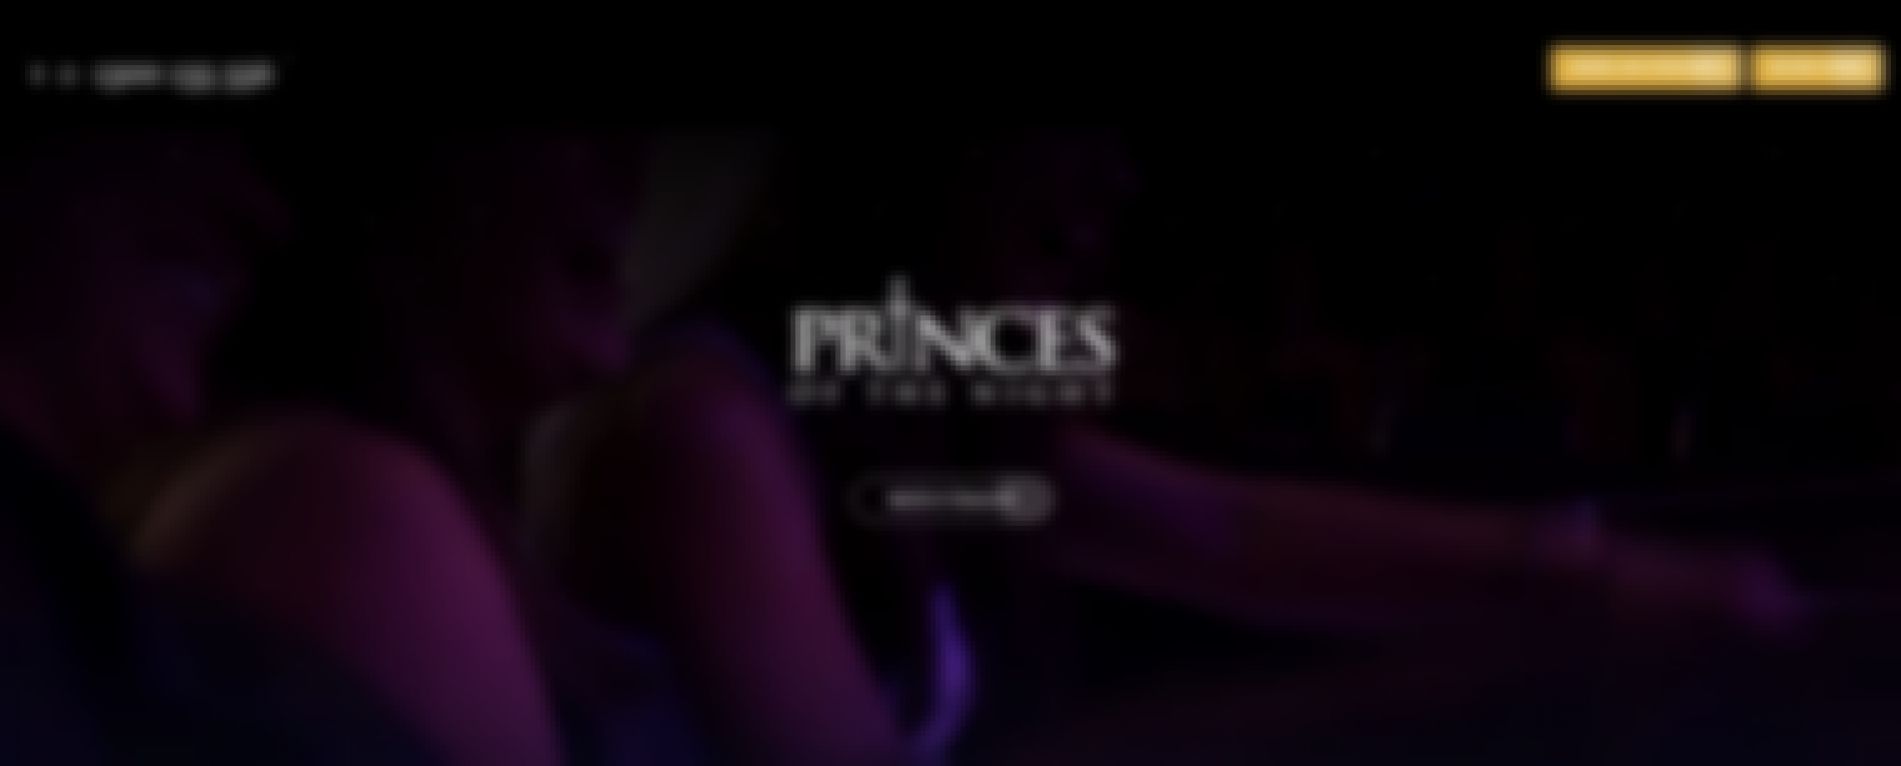 princes of the night male strippers melbourne